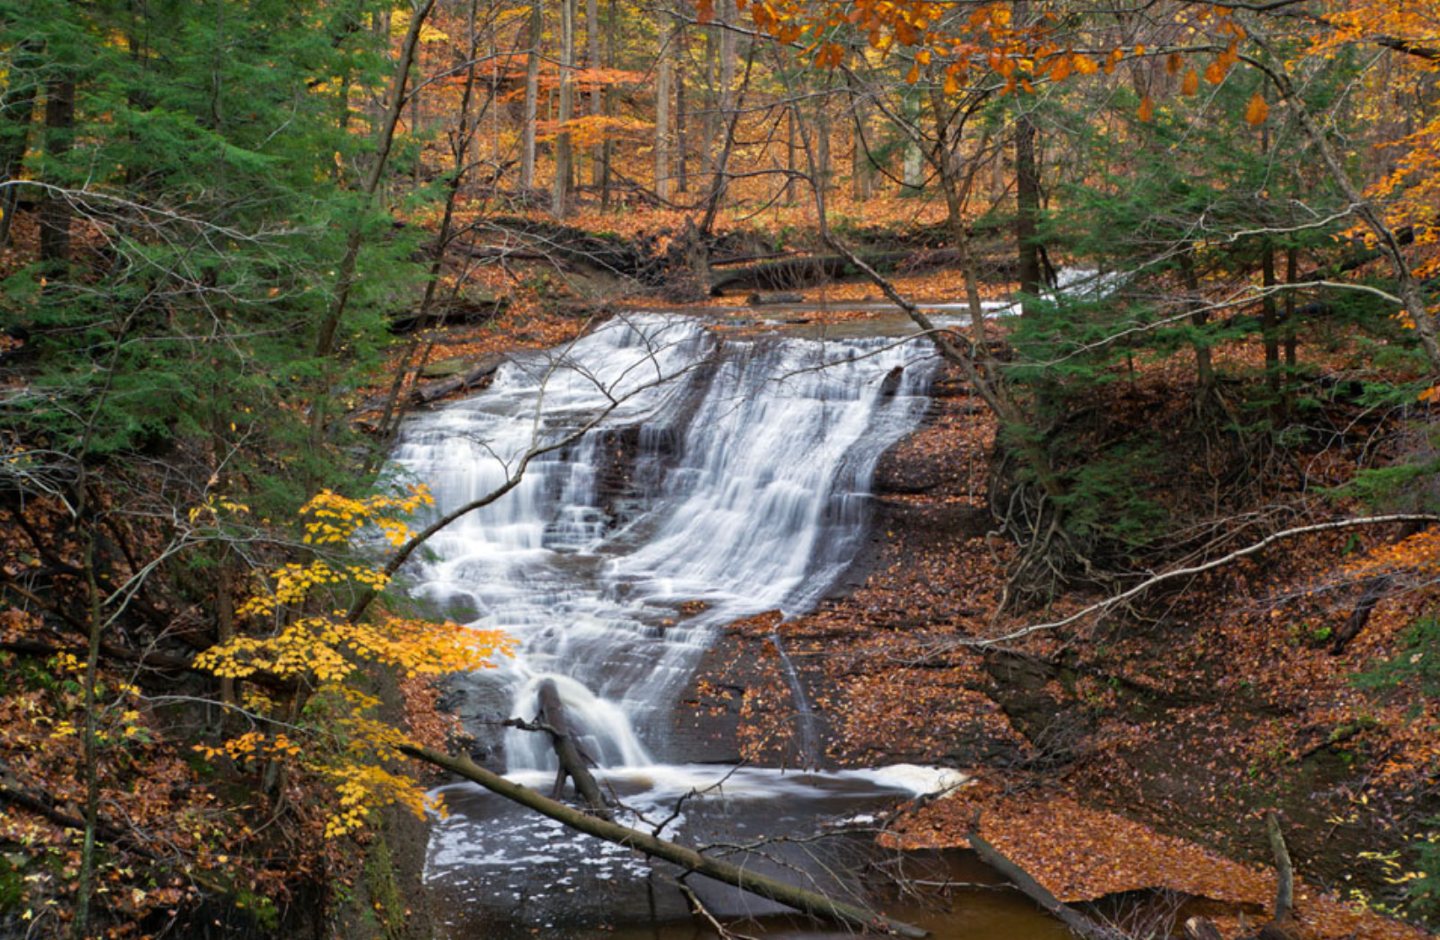 Waterfall surrounded by trees with brightly colored fall leaves